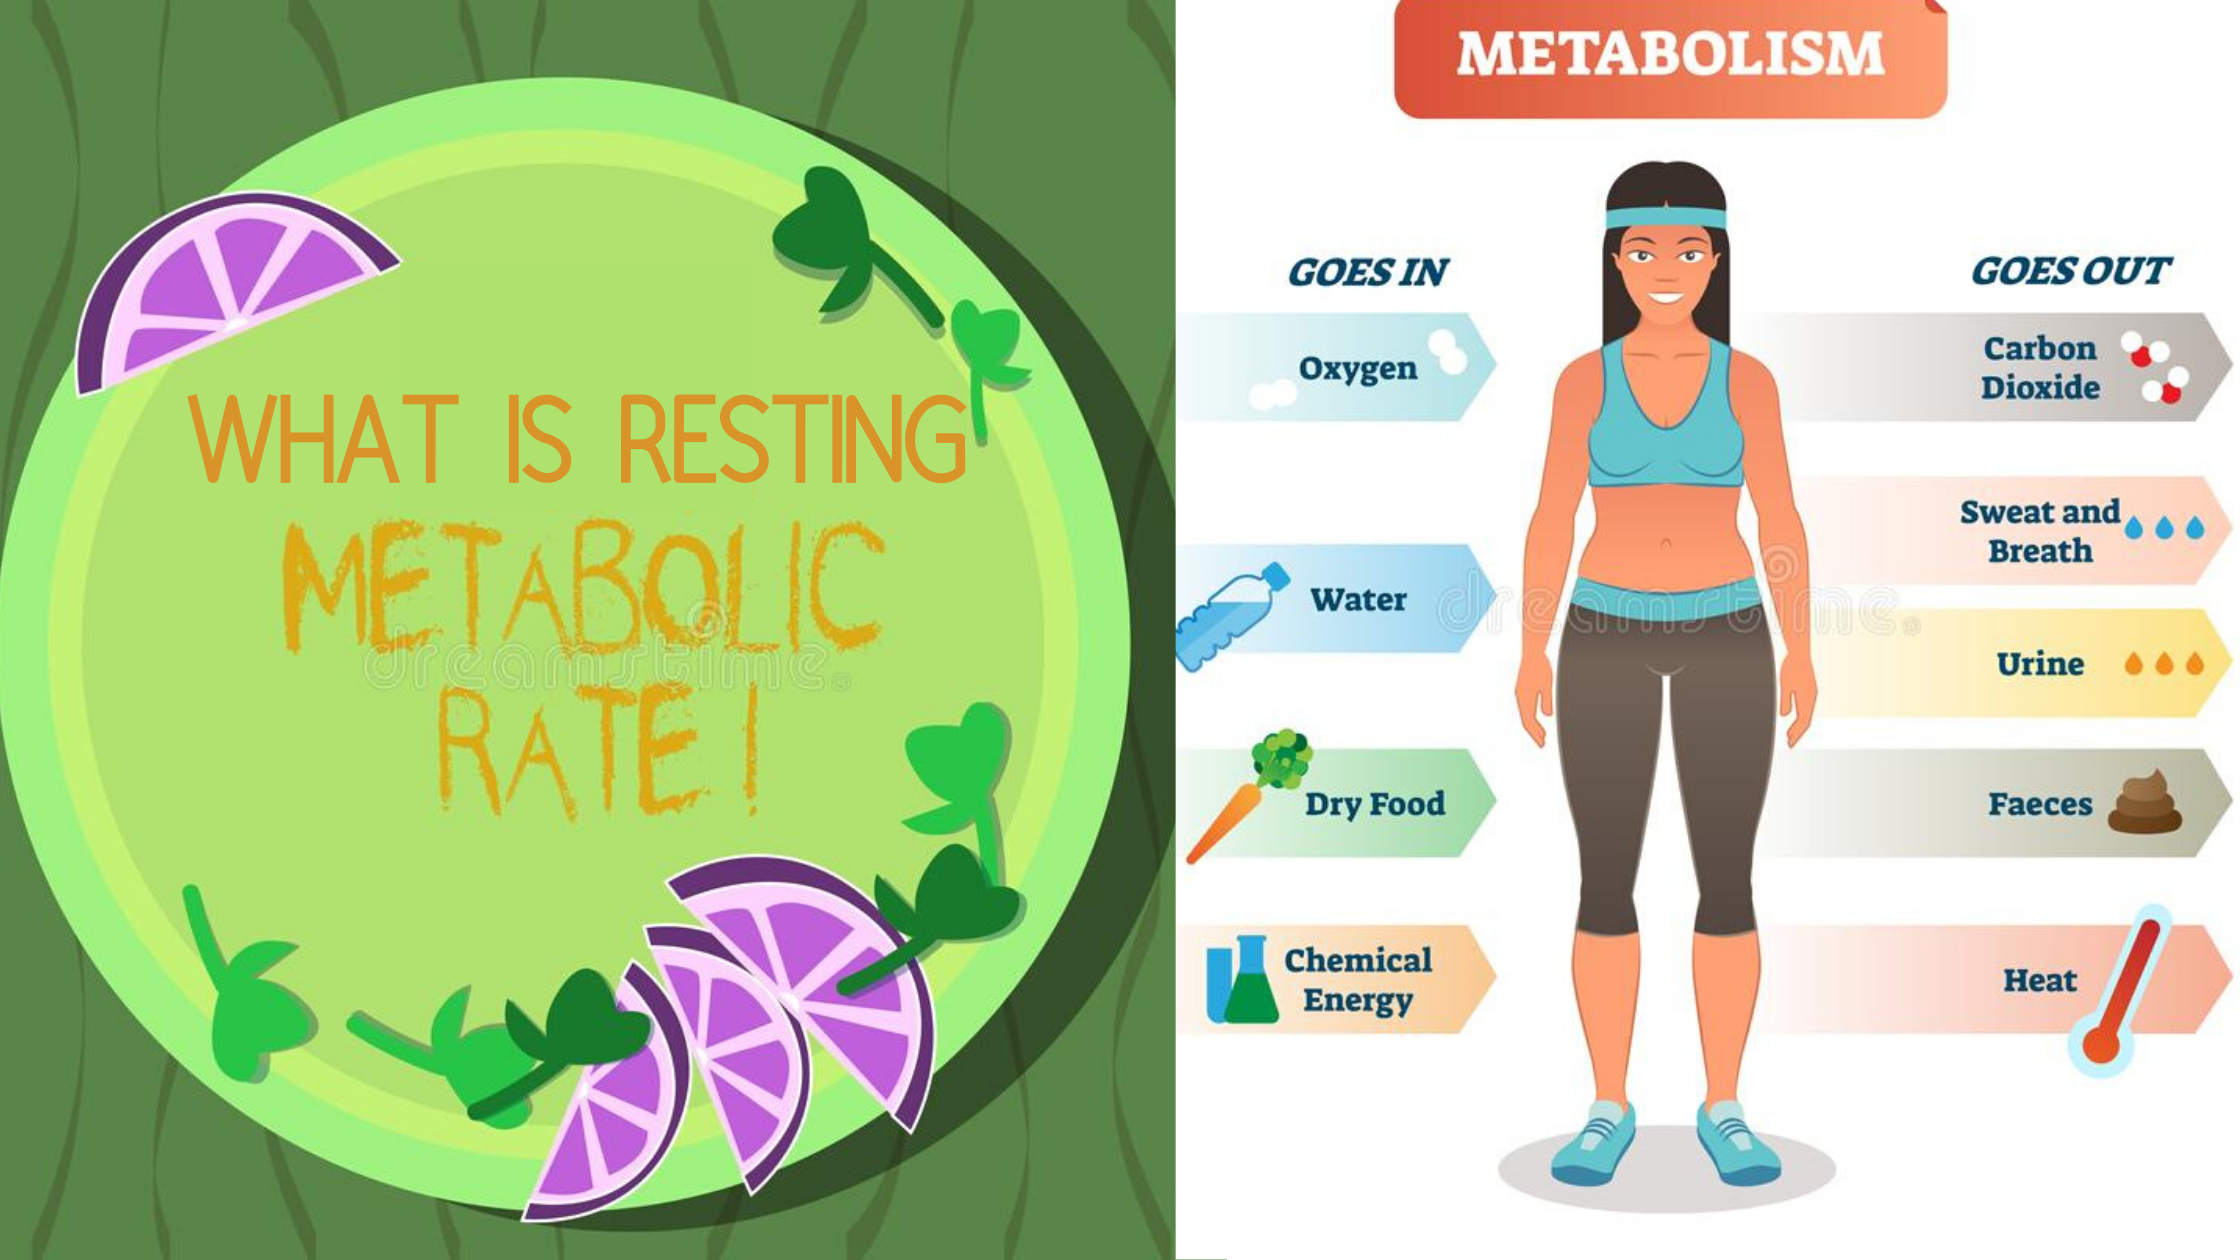 What is Resting Metabolic Rate?